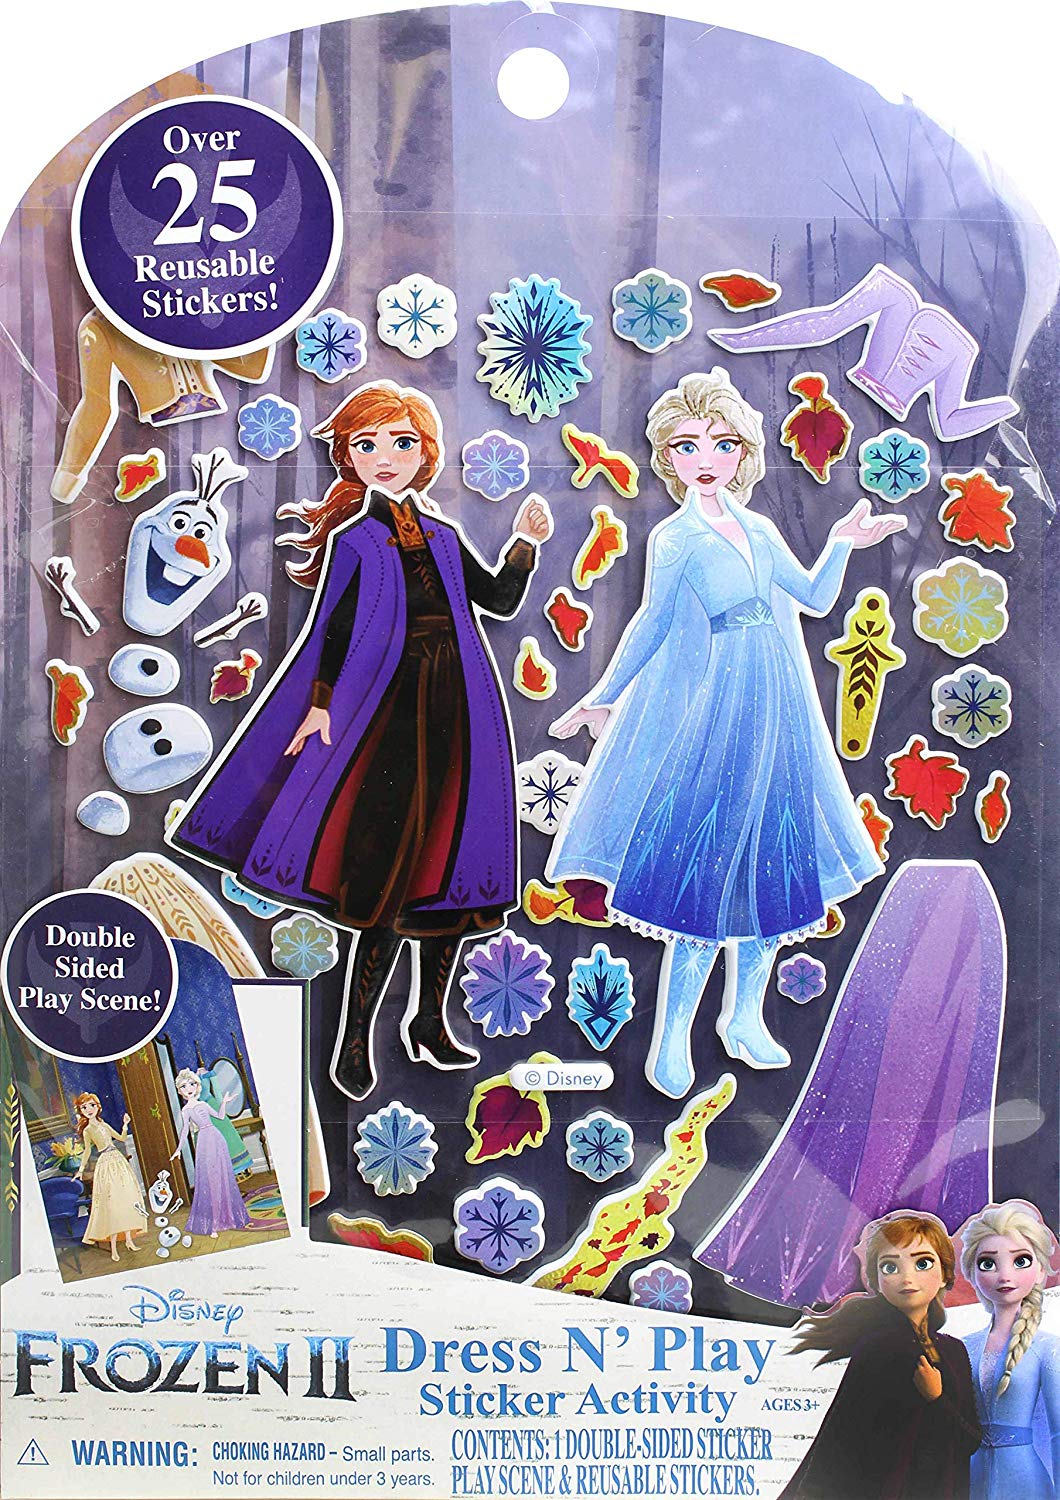 Frozen 2 Elsa and Anna paper dolls with clothing and dresses from the